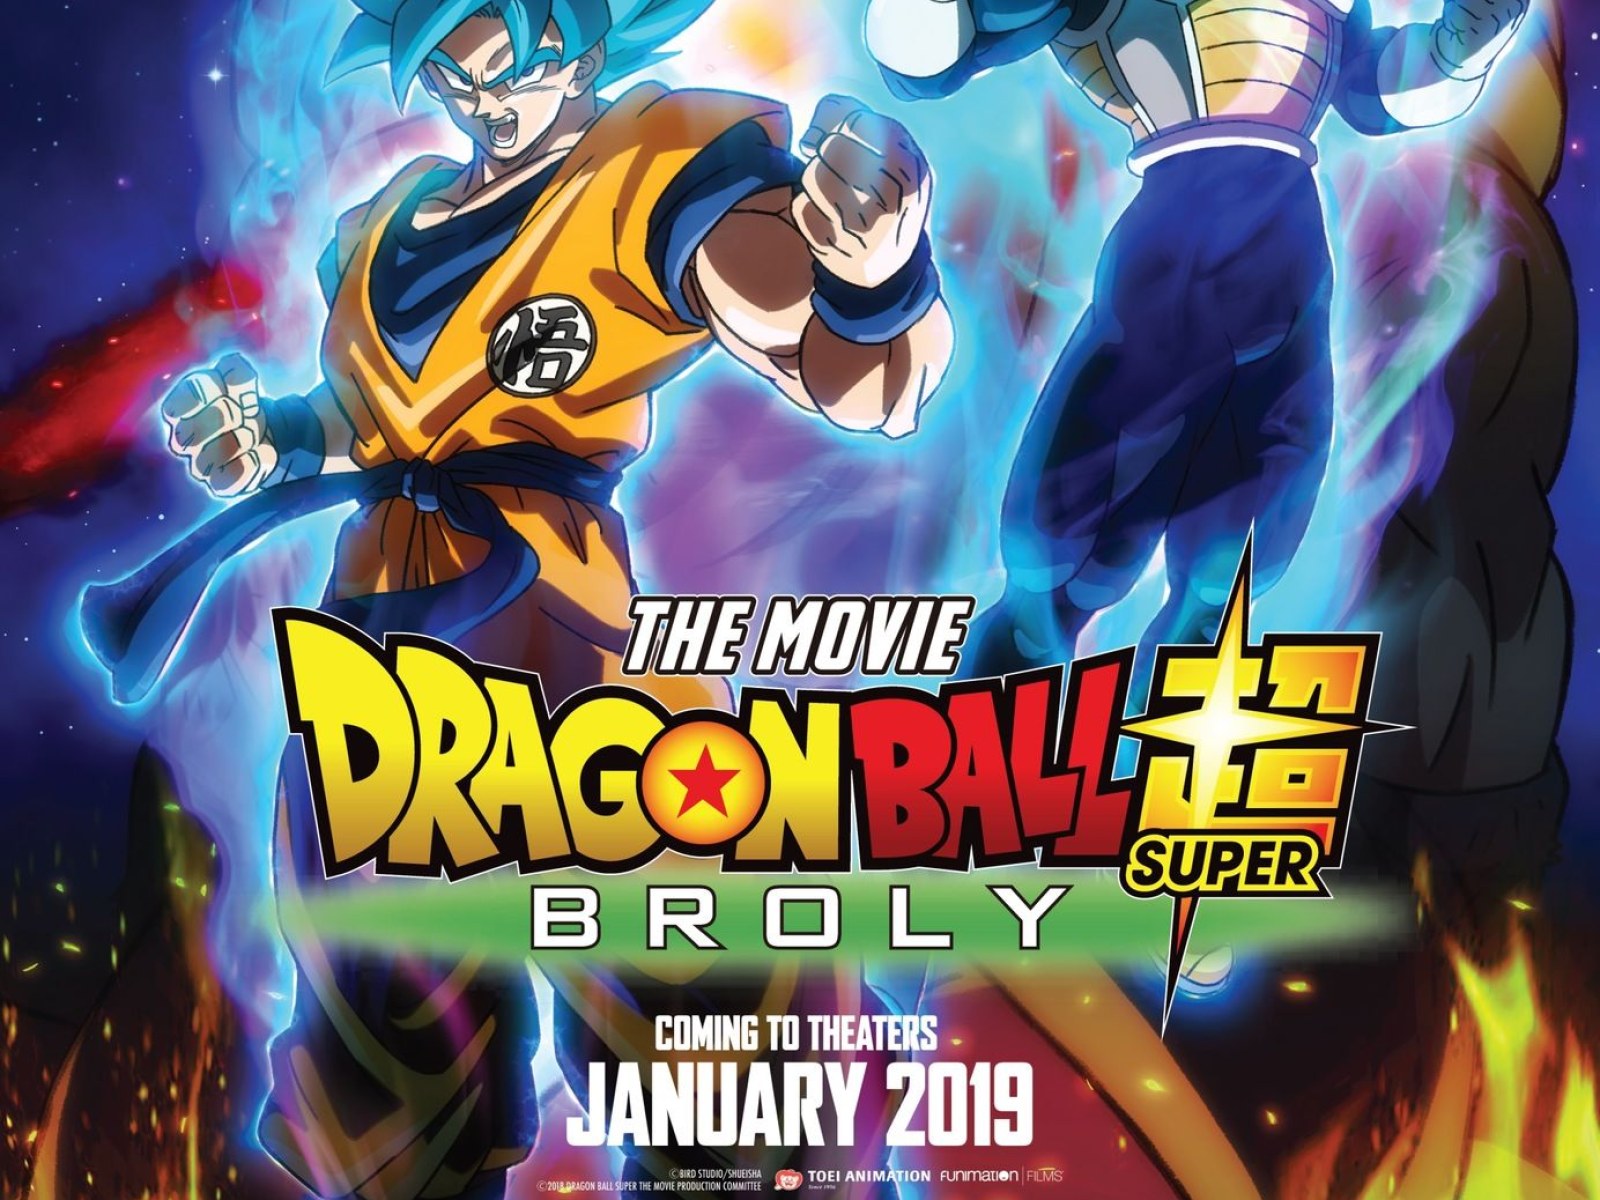 Blackjack Rants: Movie Review: Dragon Ball Z - Broly: Second Coming